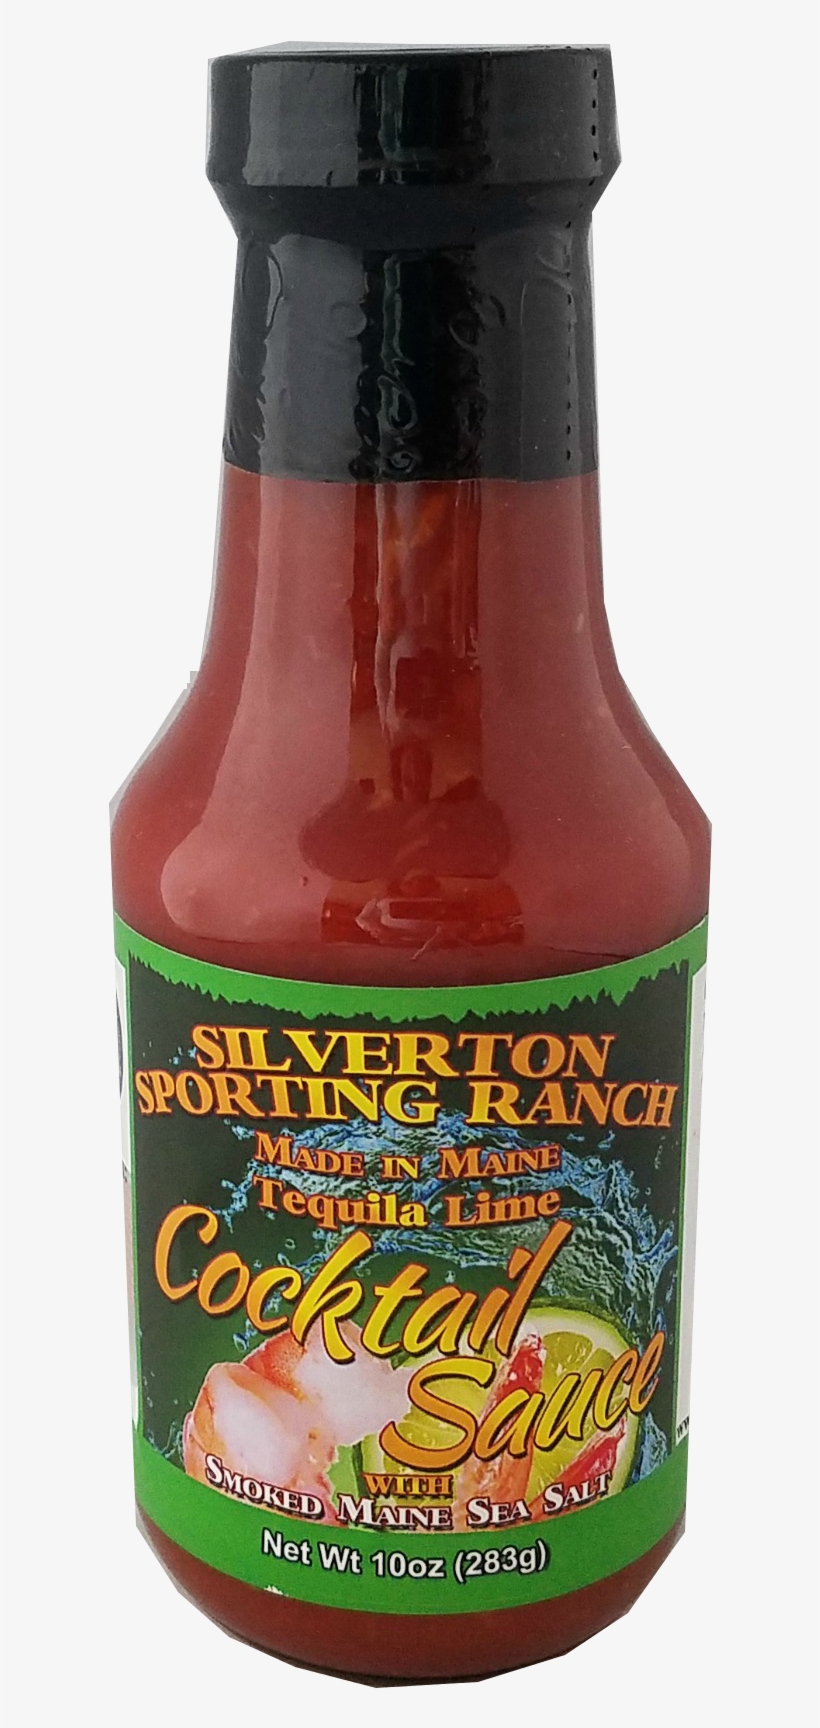 Tequila Lime Cocktail Sauce With Smoked Maine Sea Salt - Bottle, transparent png #7723969